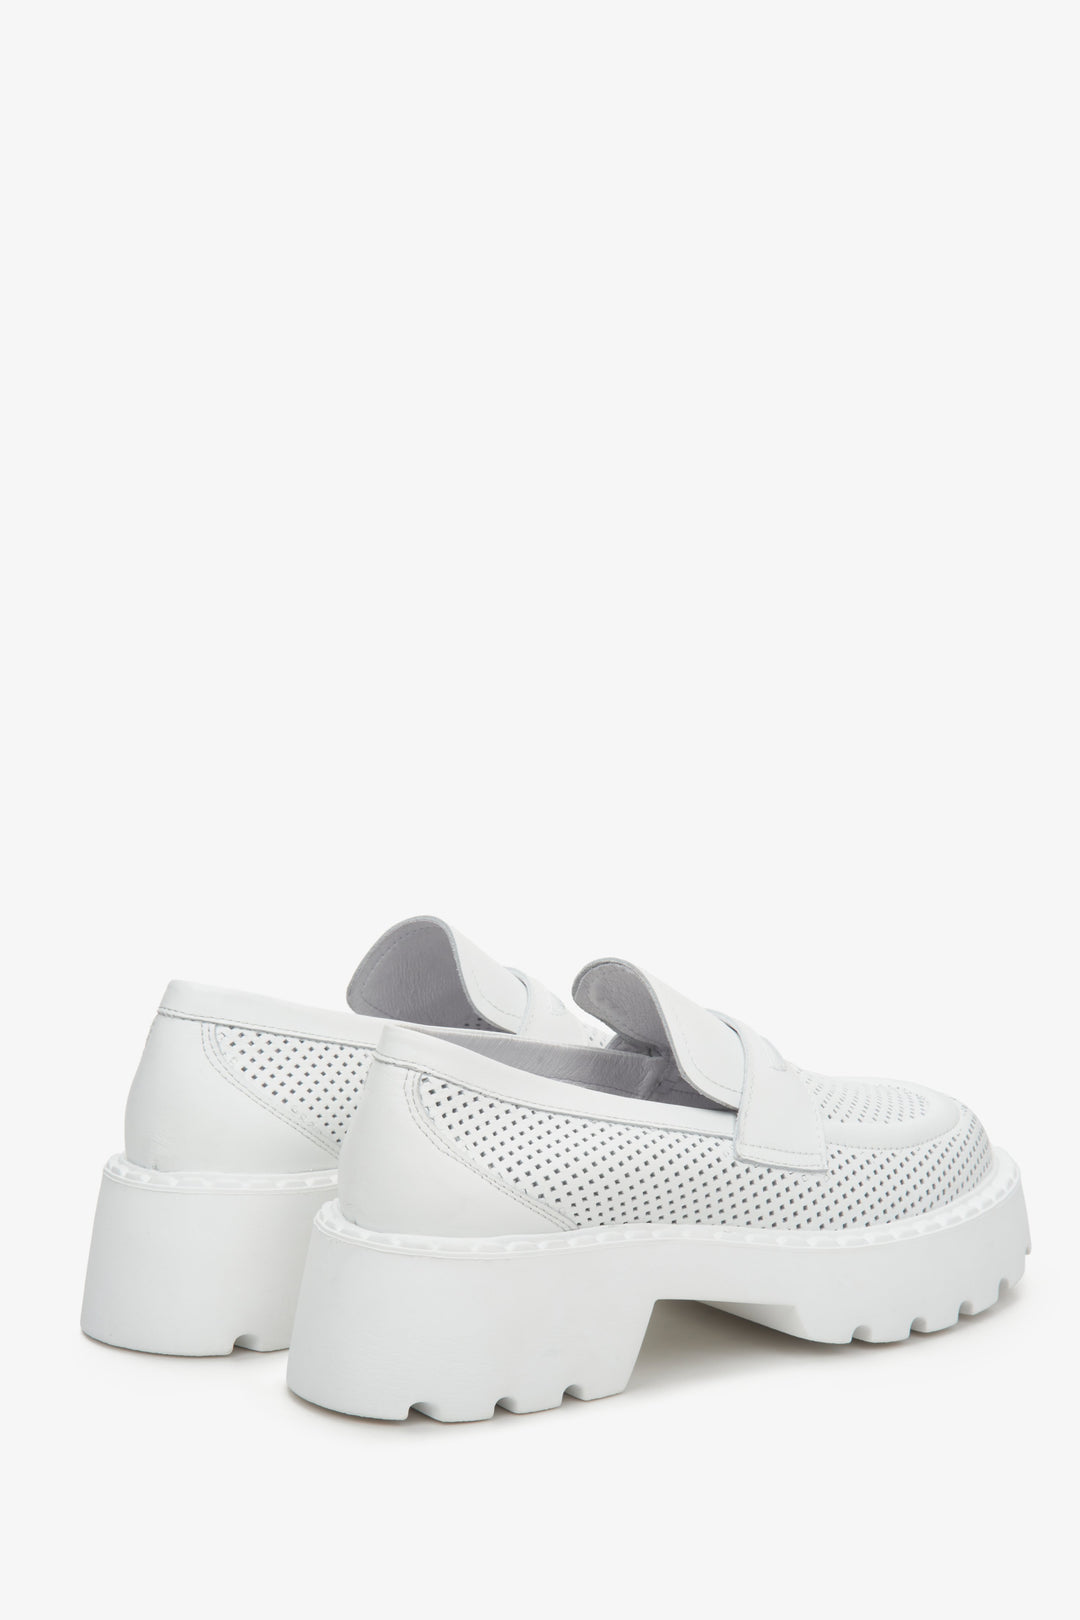 Leather moccasins for women in white of Estro brand with perforation for summer - the presentation of the heel and side seam of the shoes.